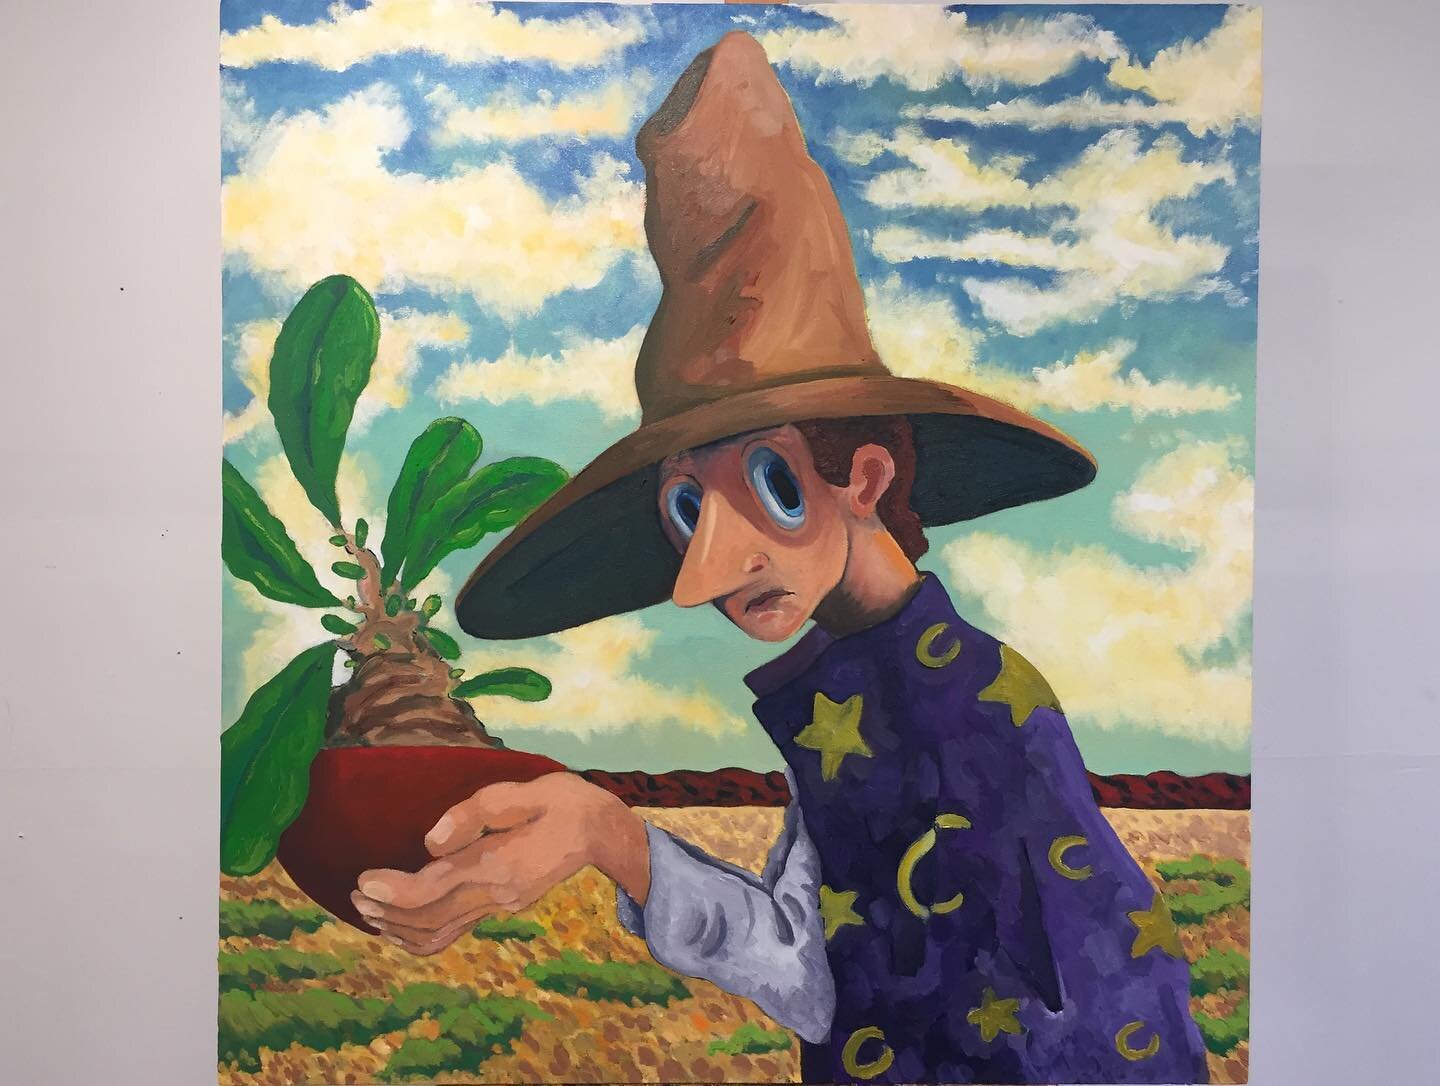 Cowboy WIZARD 🧙&zwj;♂️🤠

They also like plants

Oil paint on canvas
32in x 30.5in

#art #contemporaryart #contemporarypainting #contemporaryoilpainting #painting #oilpainting #artist #contemporaryartist #wizard #cowboy #plants